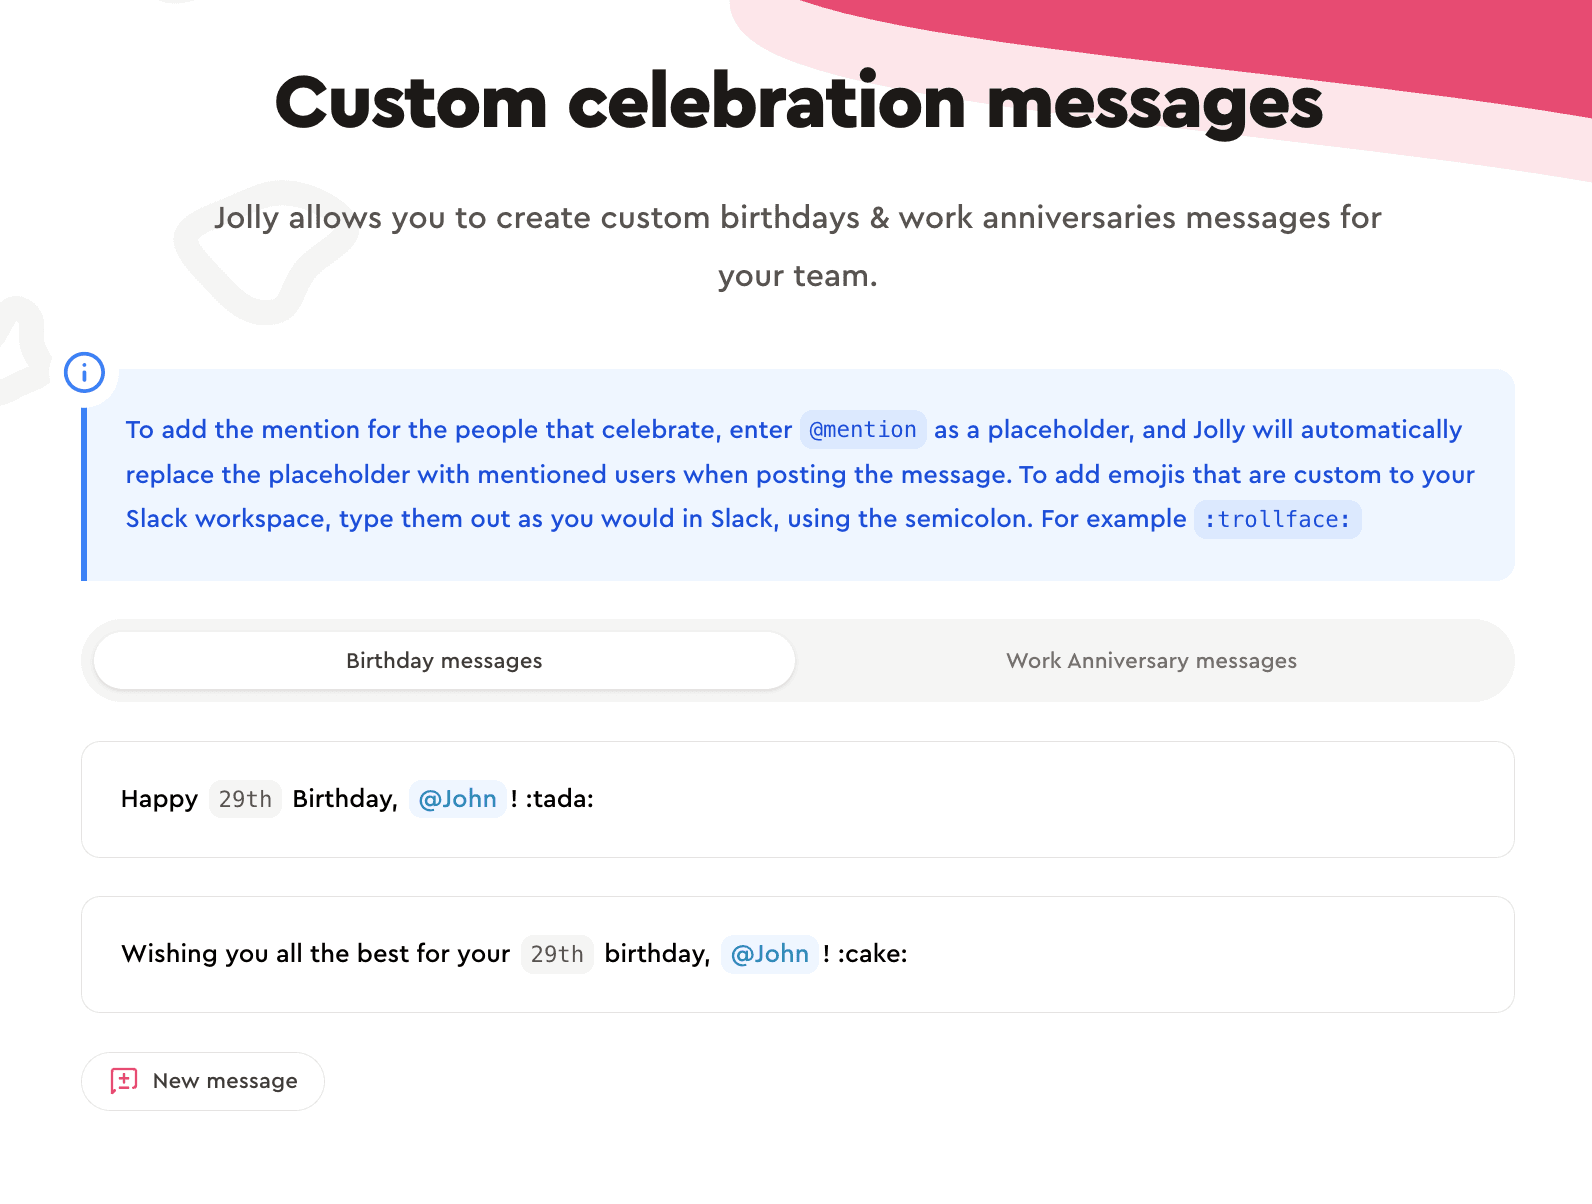 Customizing messages